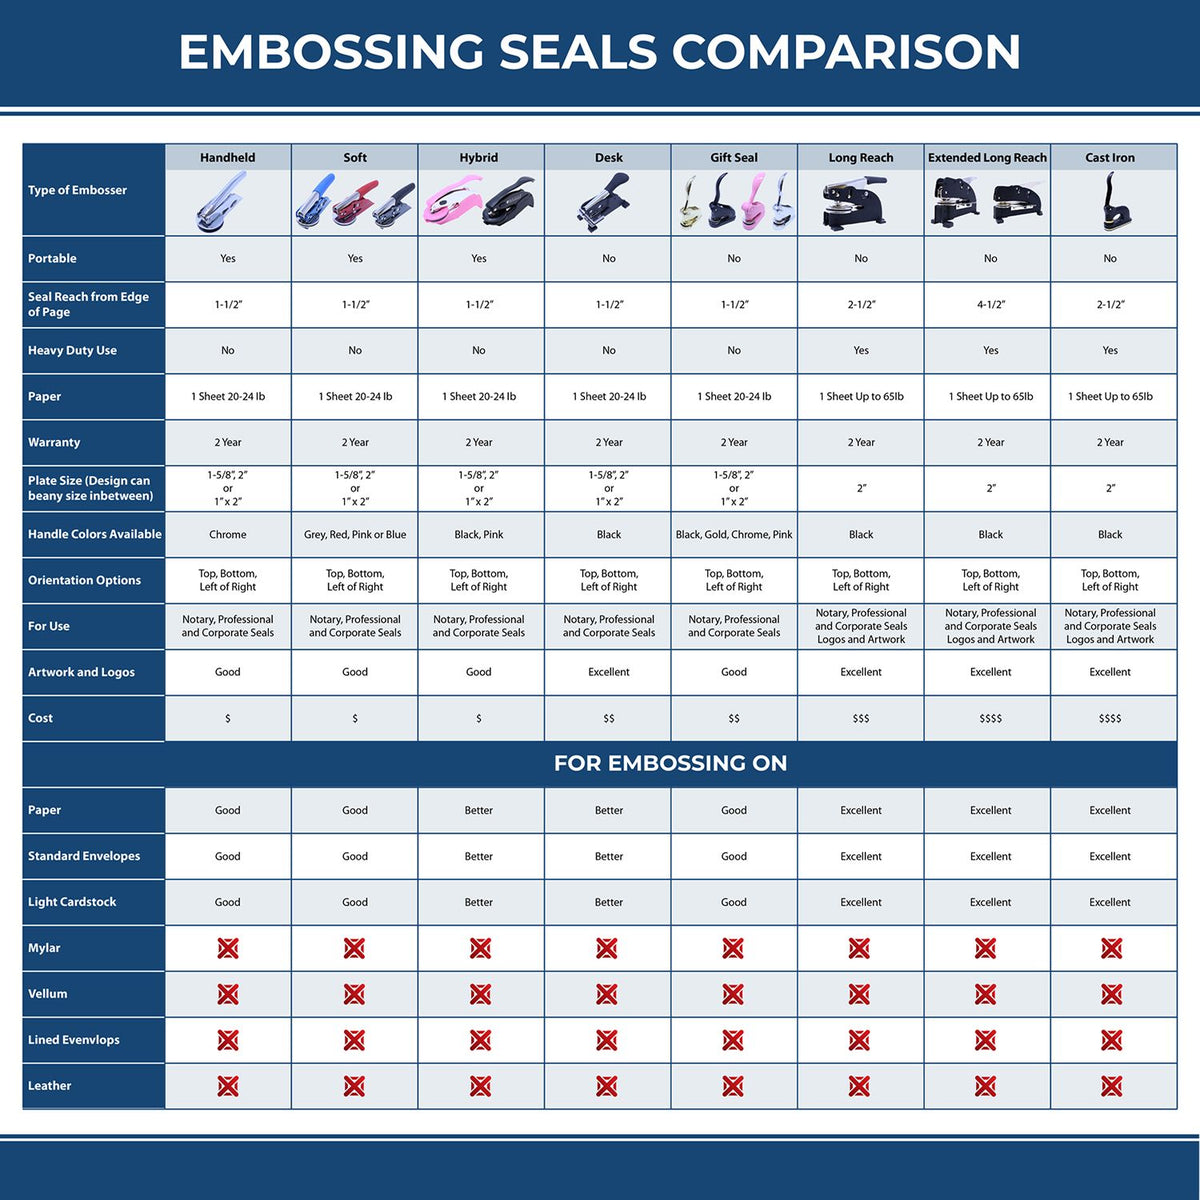 A comparison chart for the different types of mount models available for the Soft Indiana Professional Geologist Seal